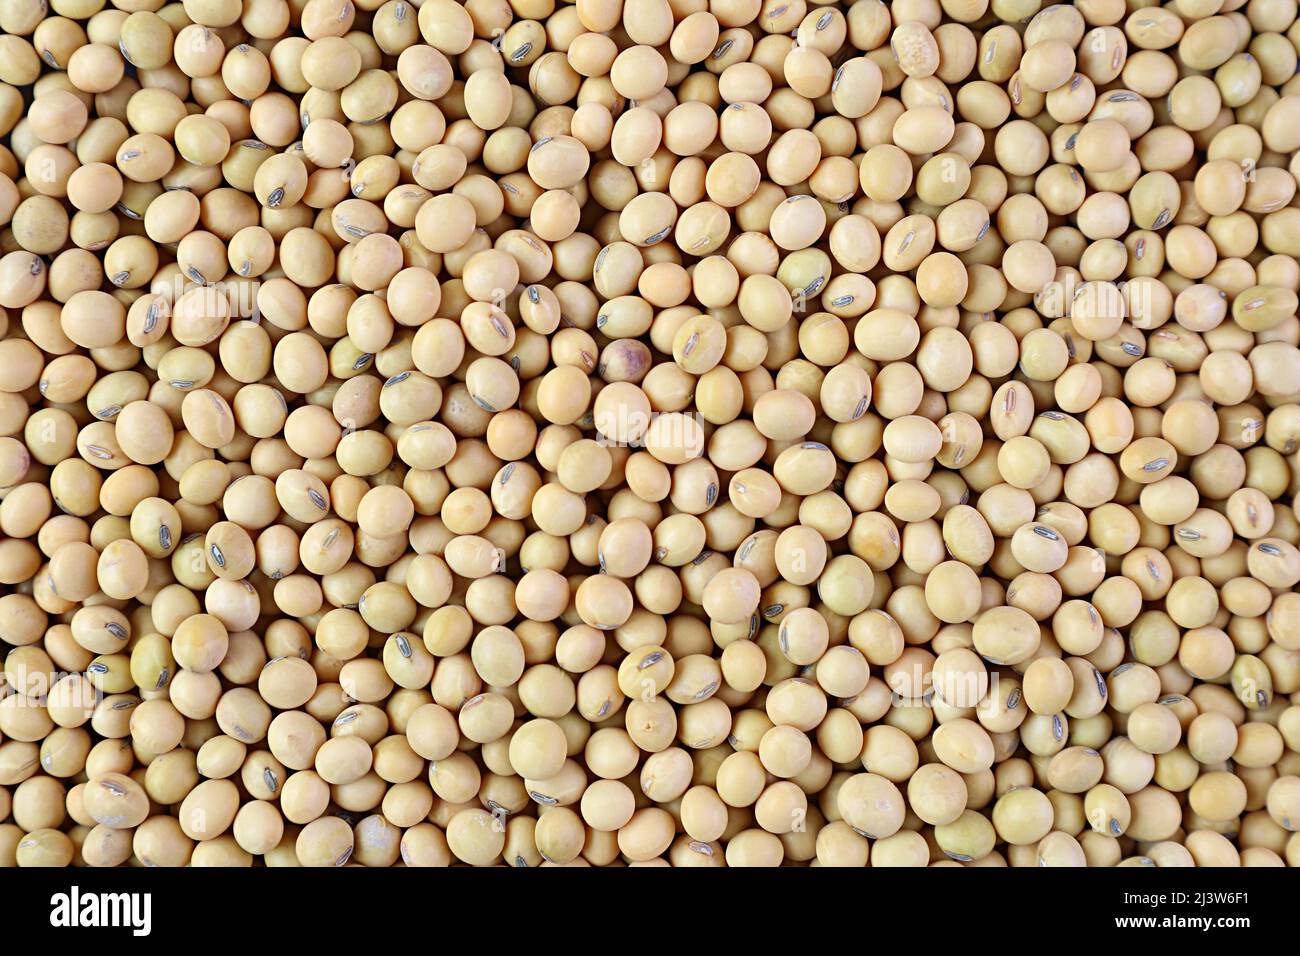 Top view of heap of dried soybeans for backdrop or banner Stock Photo